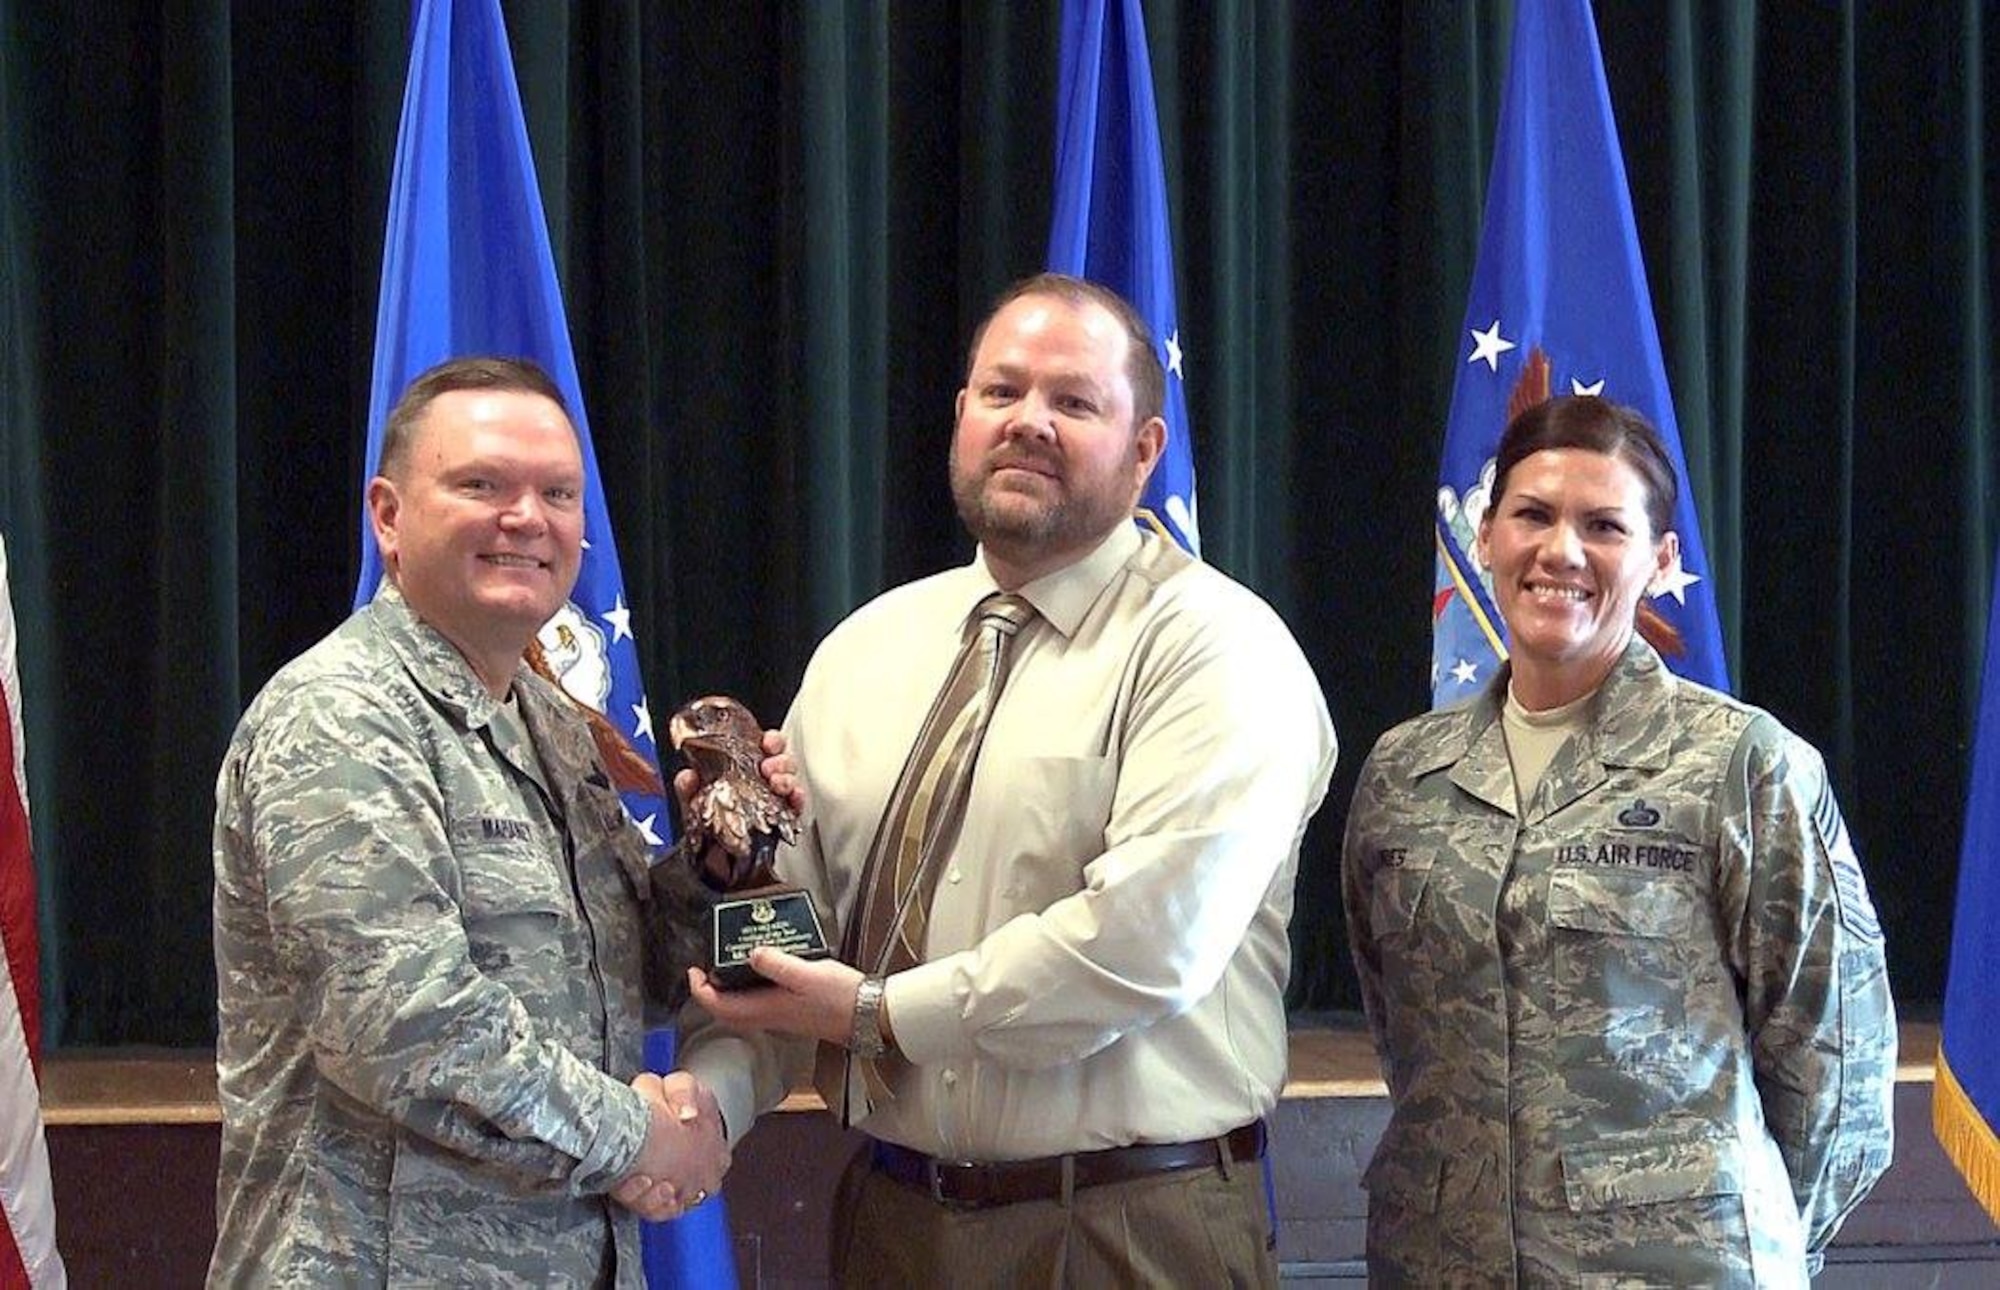 Brig. Gen. Samuel “Bo” Mahaney, Air Reserve Personnel Center commander, and Chief Master Sgt. Ruthe Flores, ARPC command chief, present the Category II, Non-Supervisory Civilian of the Year award to Gary Thurman. Mahaney honored ARPC’s 2015 outstanding performers of the year Feb. 16, 2016, at the Heritage Eagle Bend Country Club in Aurora, Colo. (U.S. Air Force photo/Quinn Jacobson)